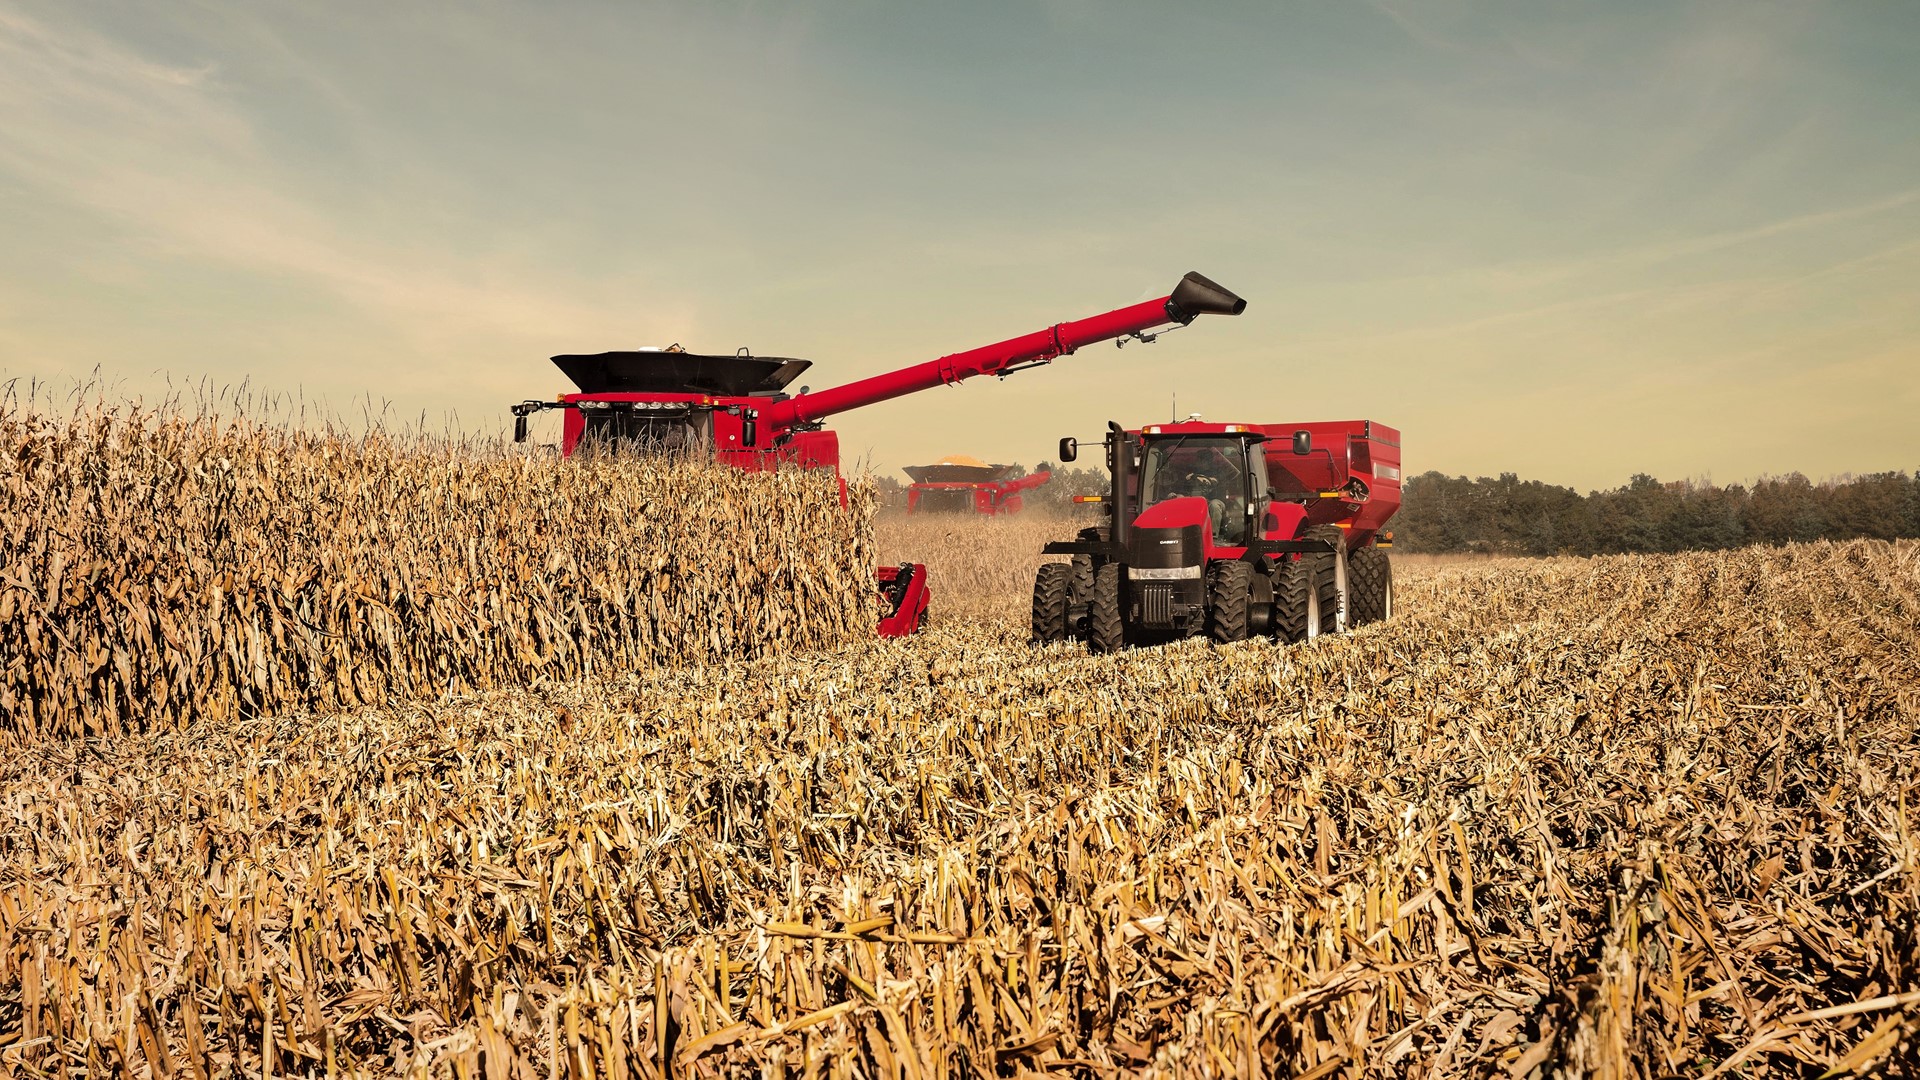 Case IH agricultural equipment